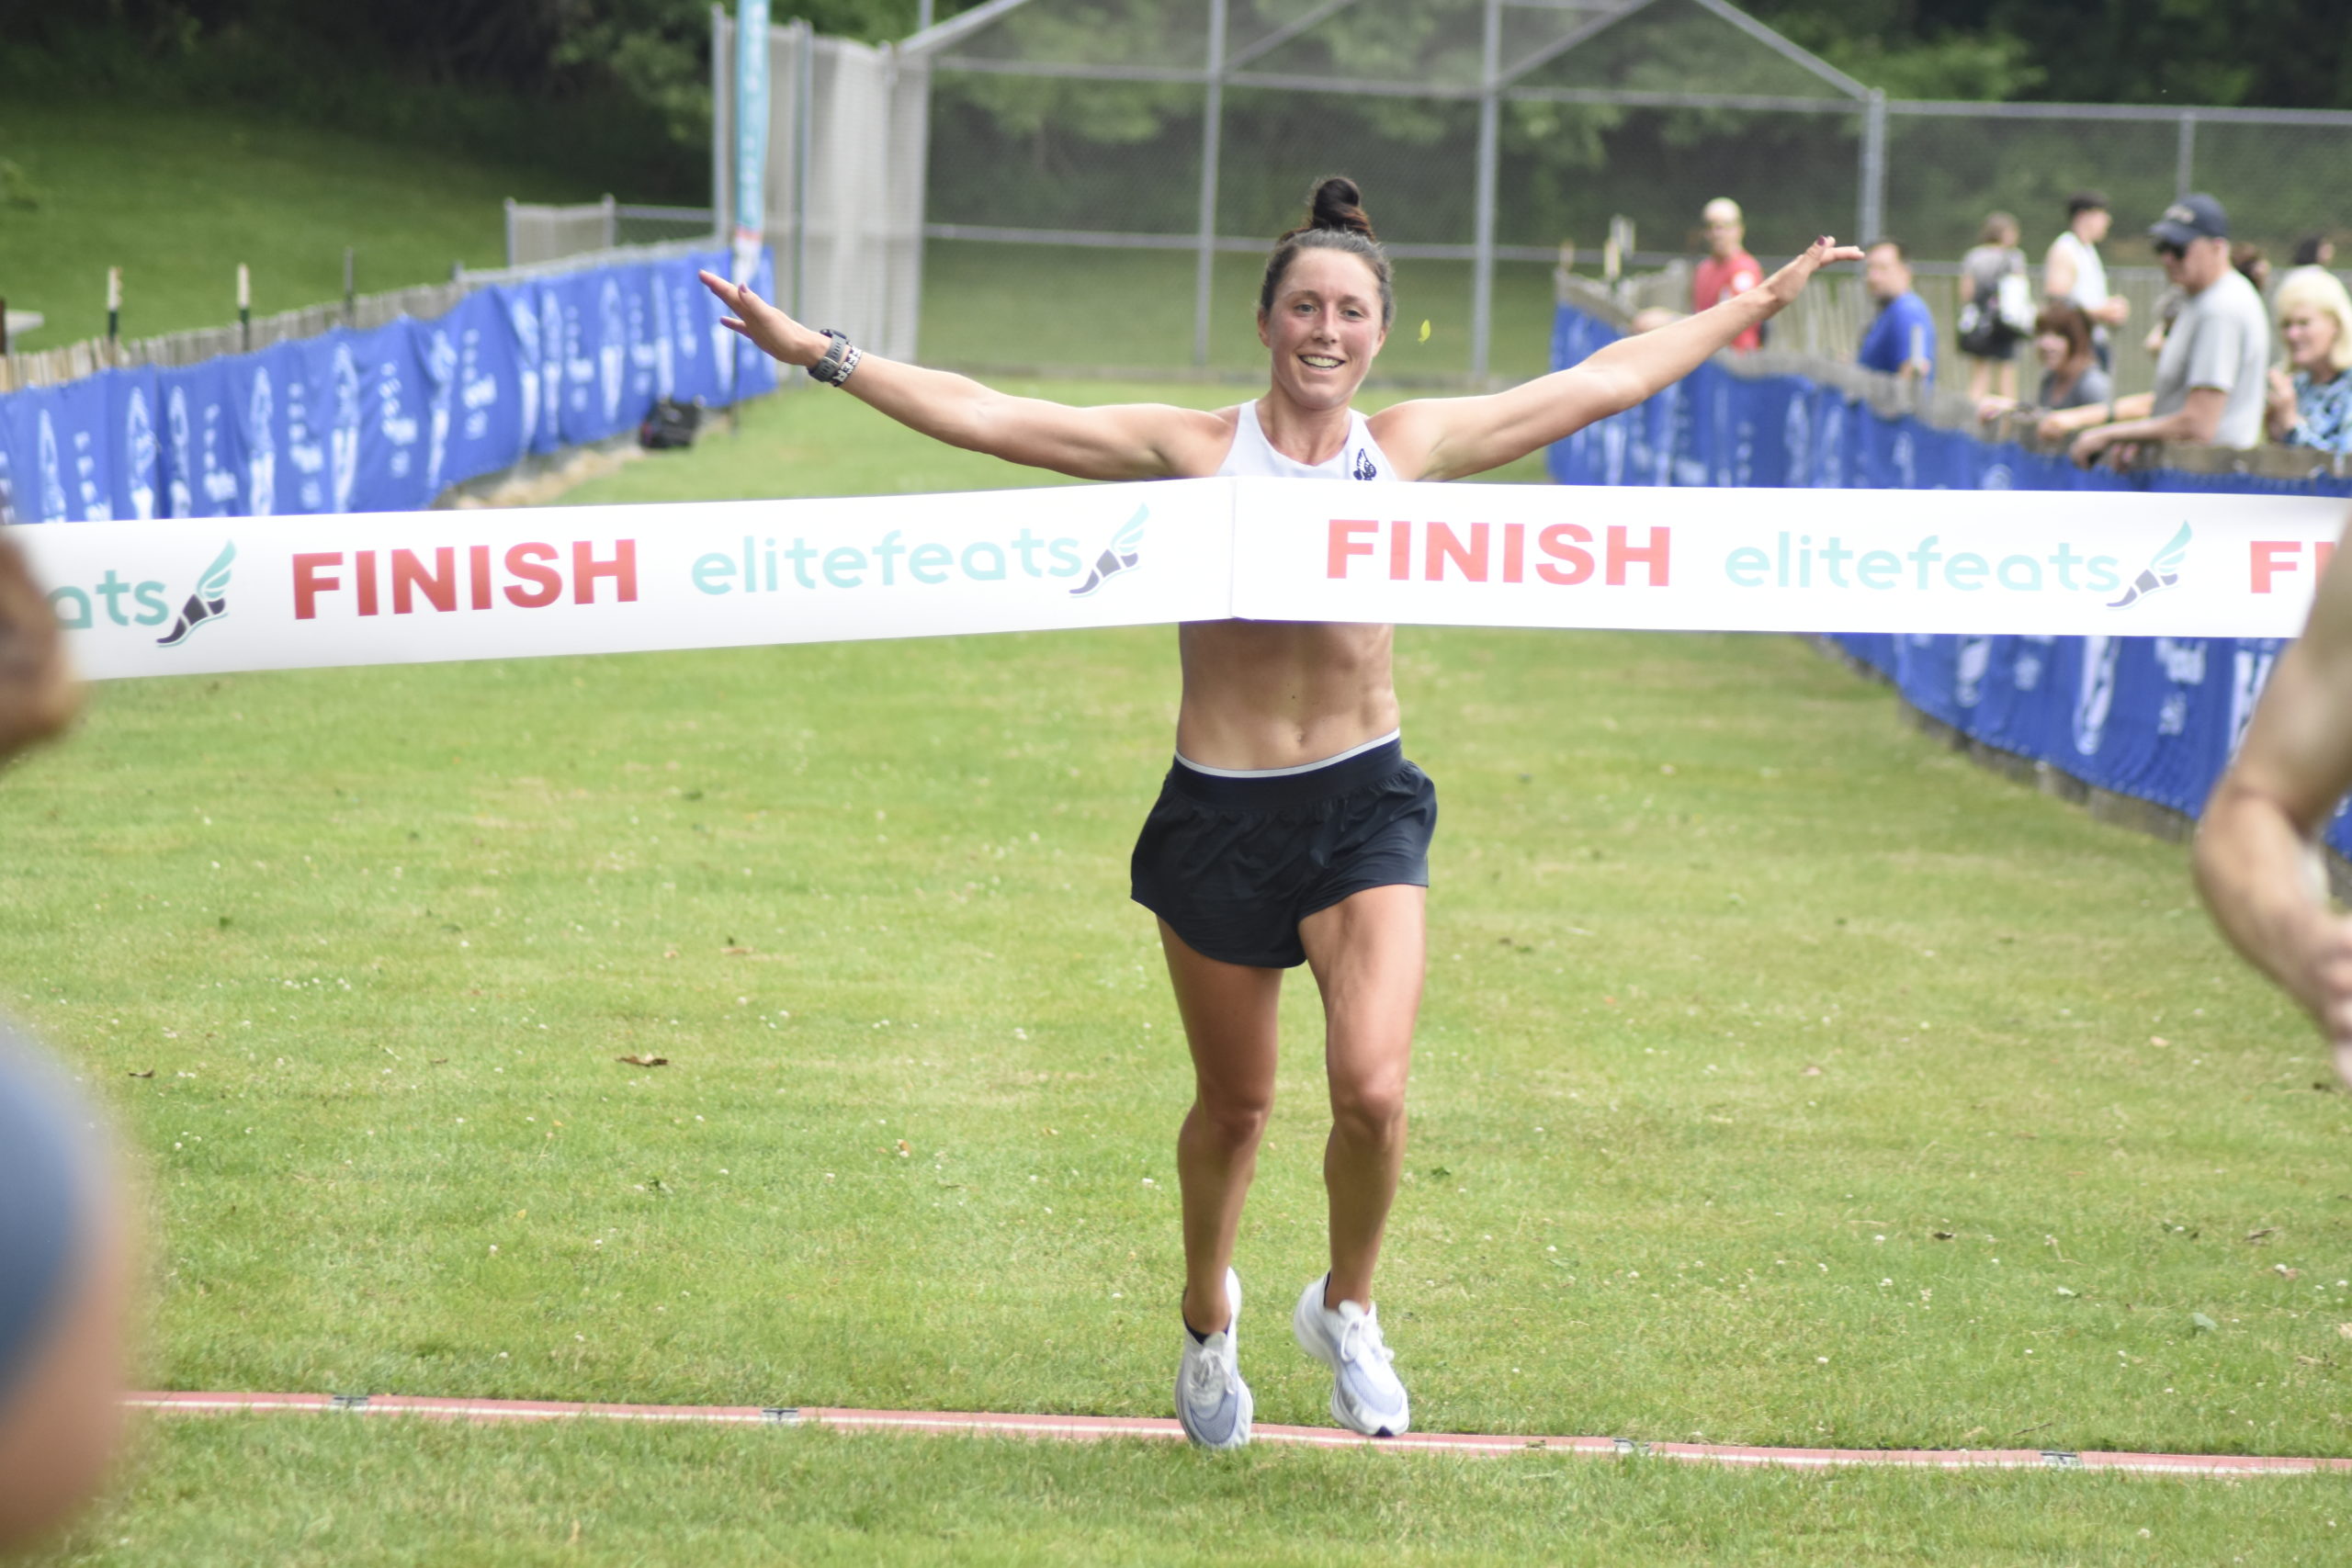 Allie Kieffer, 33, of West Islip was the women's champion of the Shelter Island 10K on Saturday.